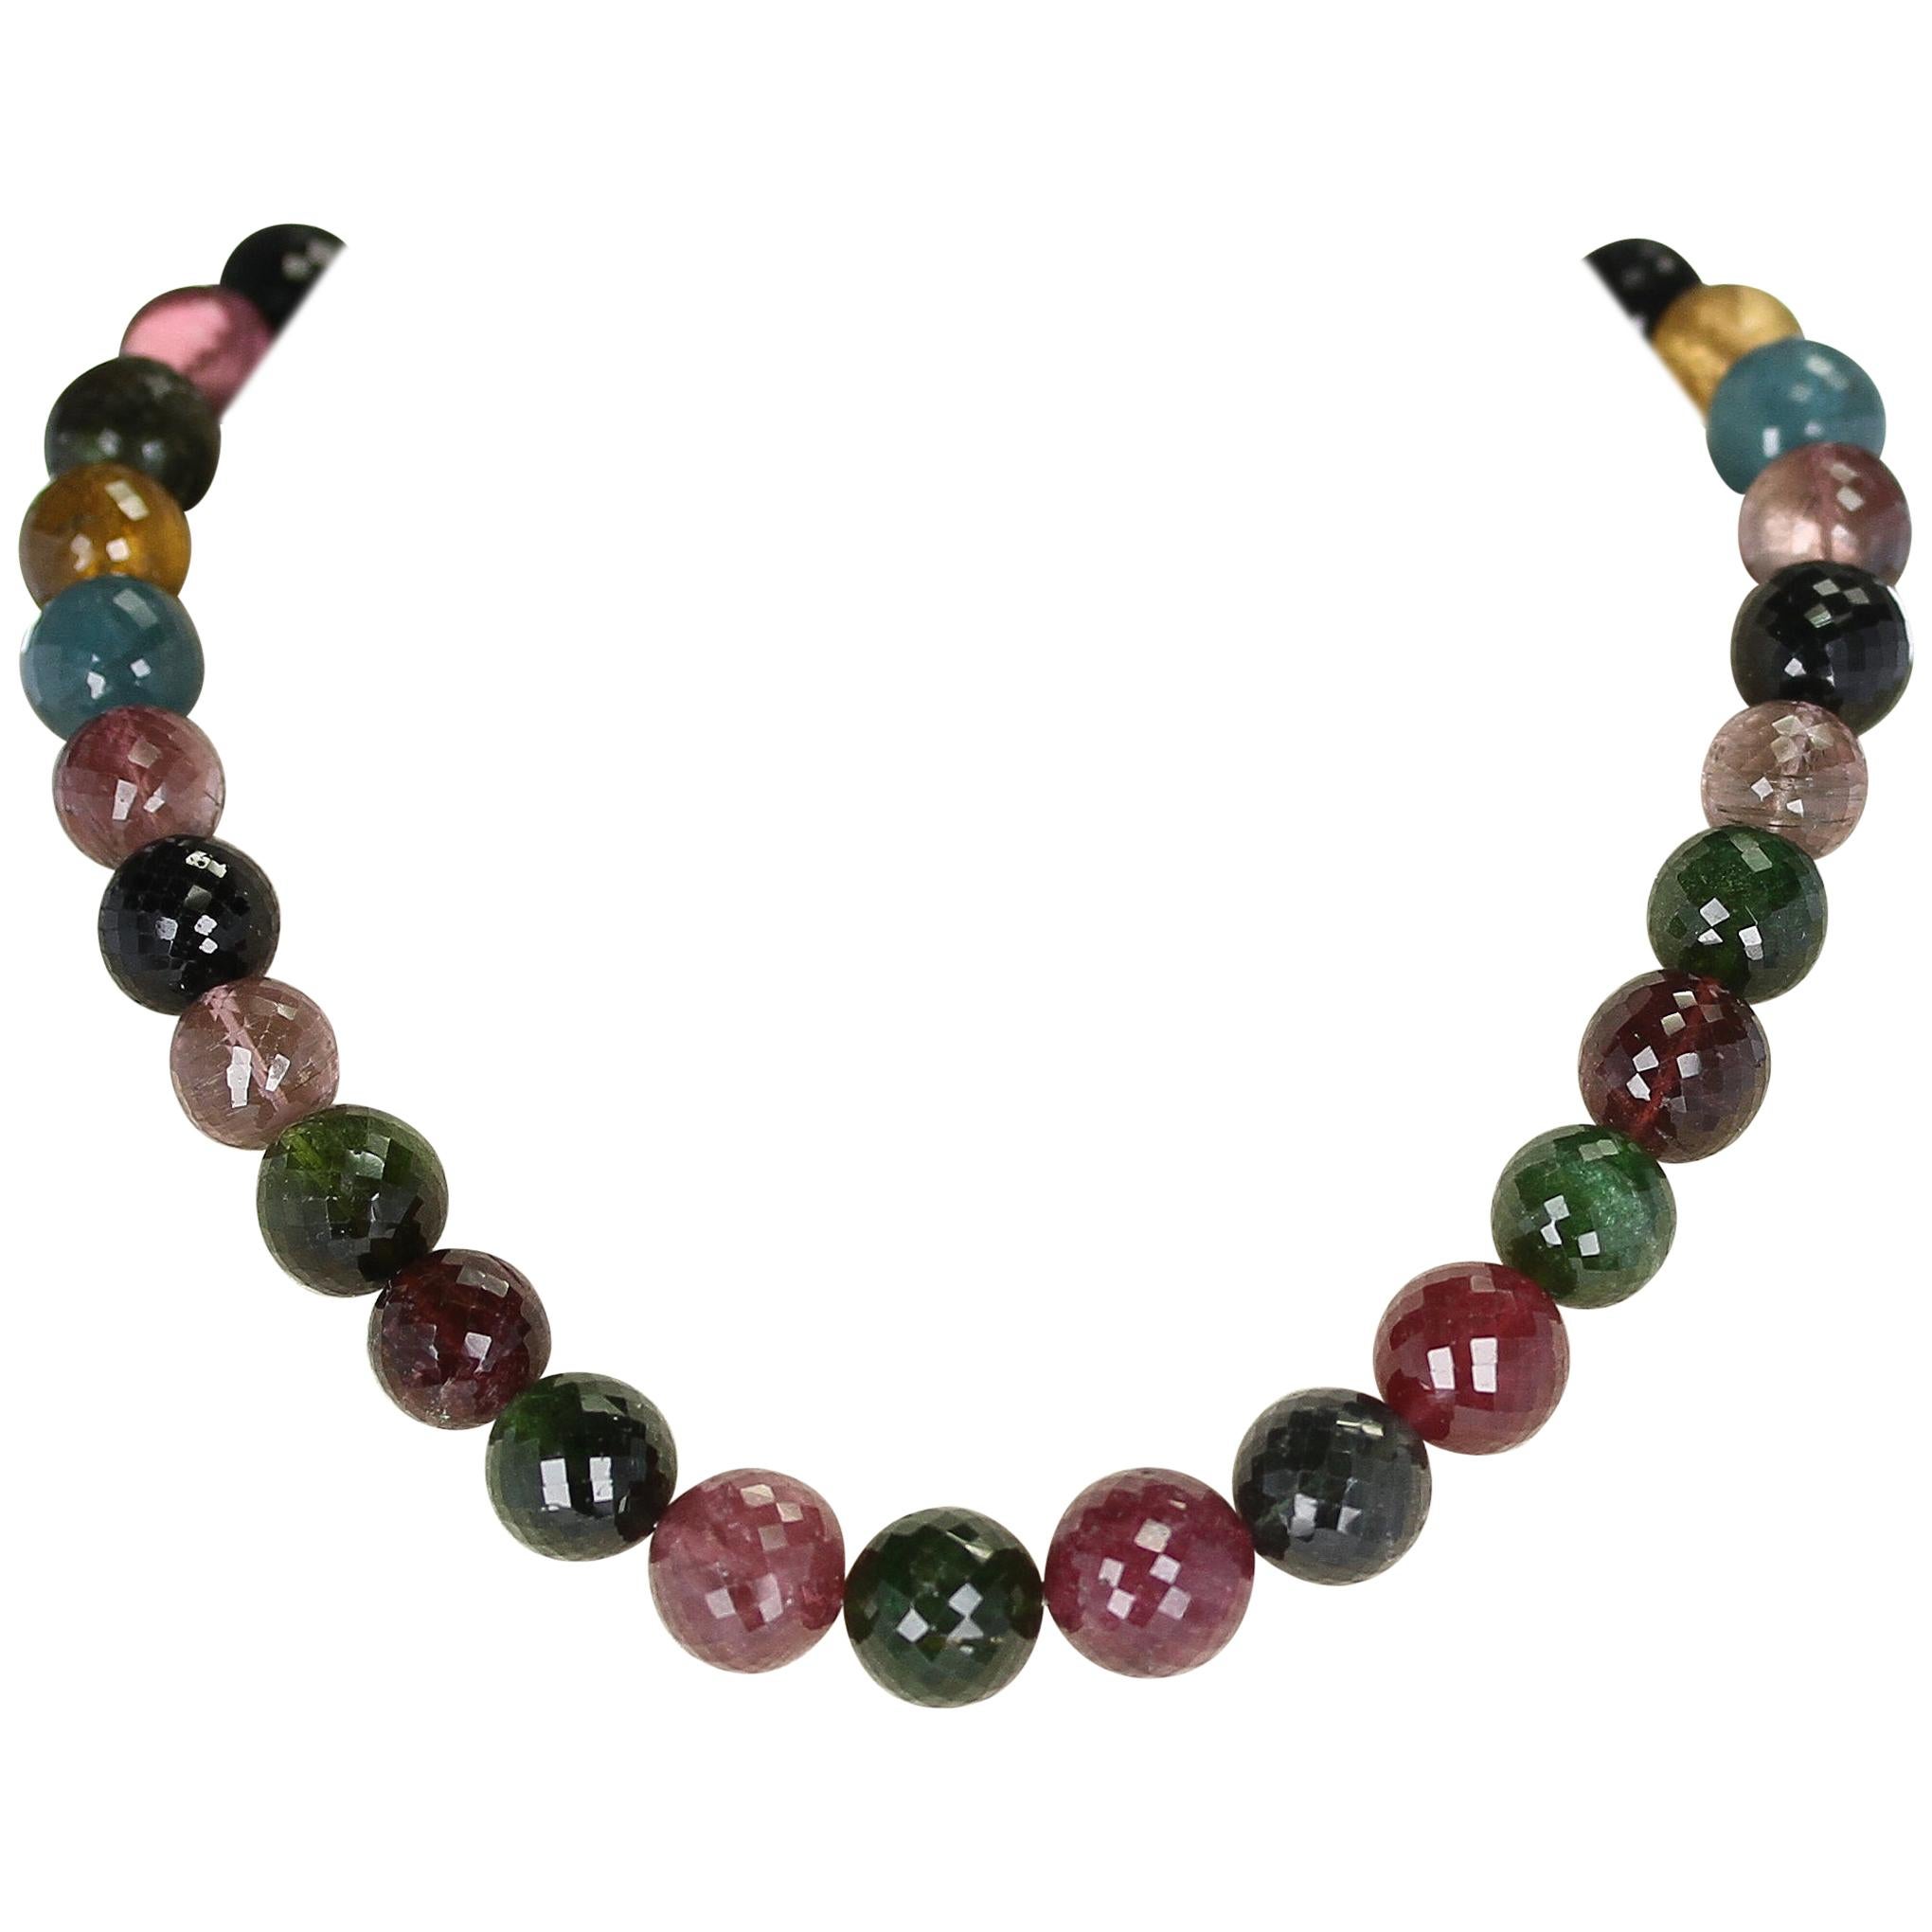 Genuine and Natural Large Round and Faceted Multi-Tourmaline Beads Necklace Gold